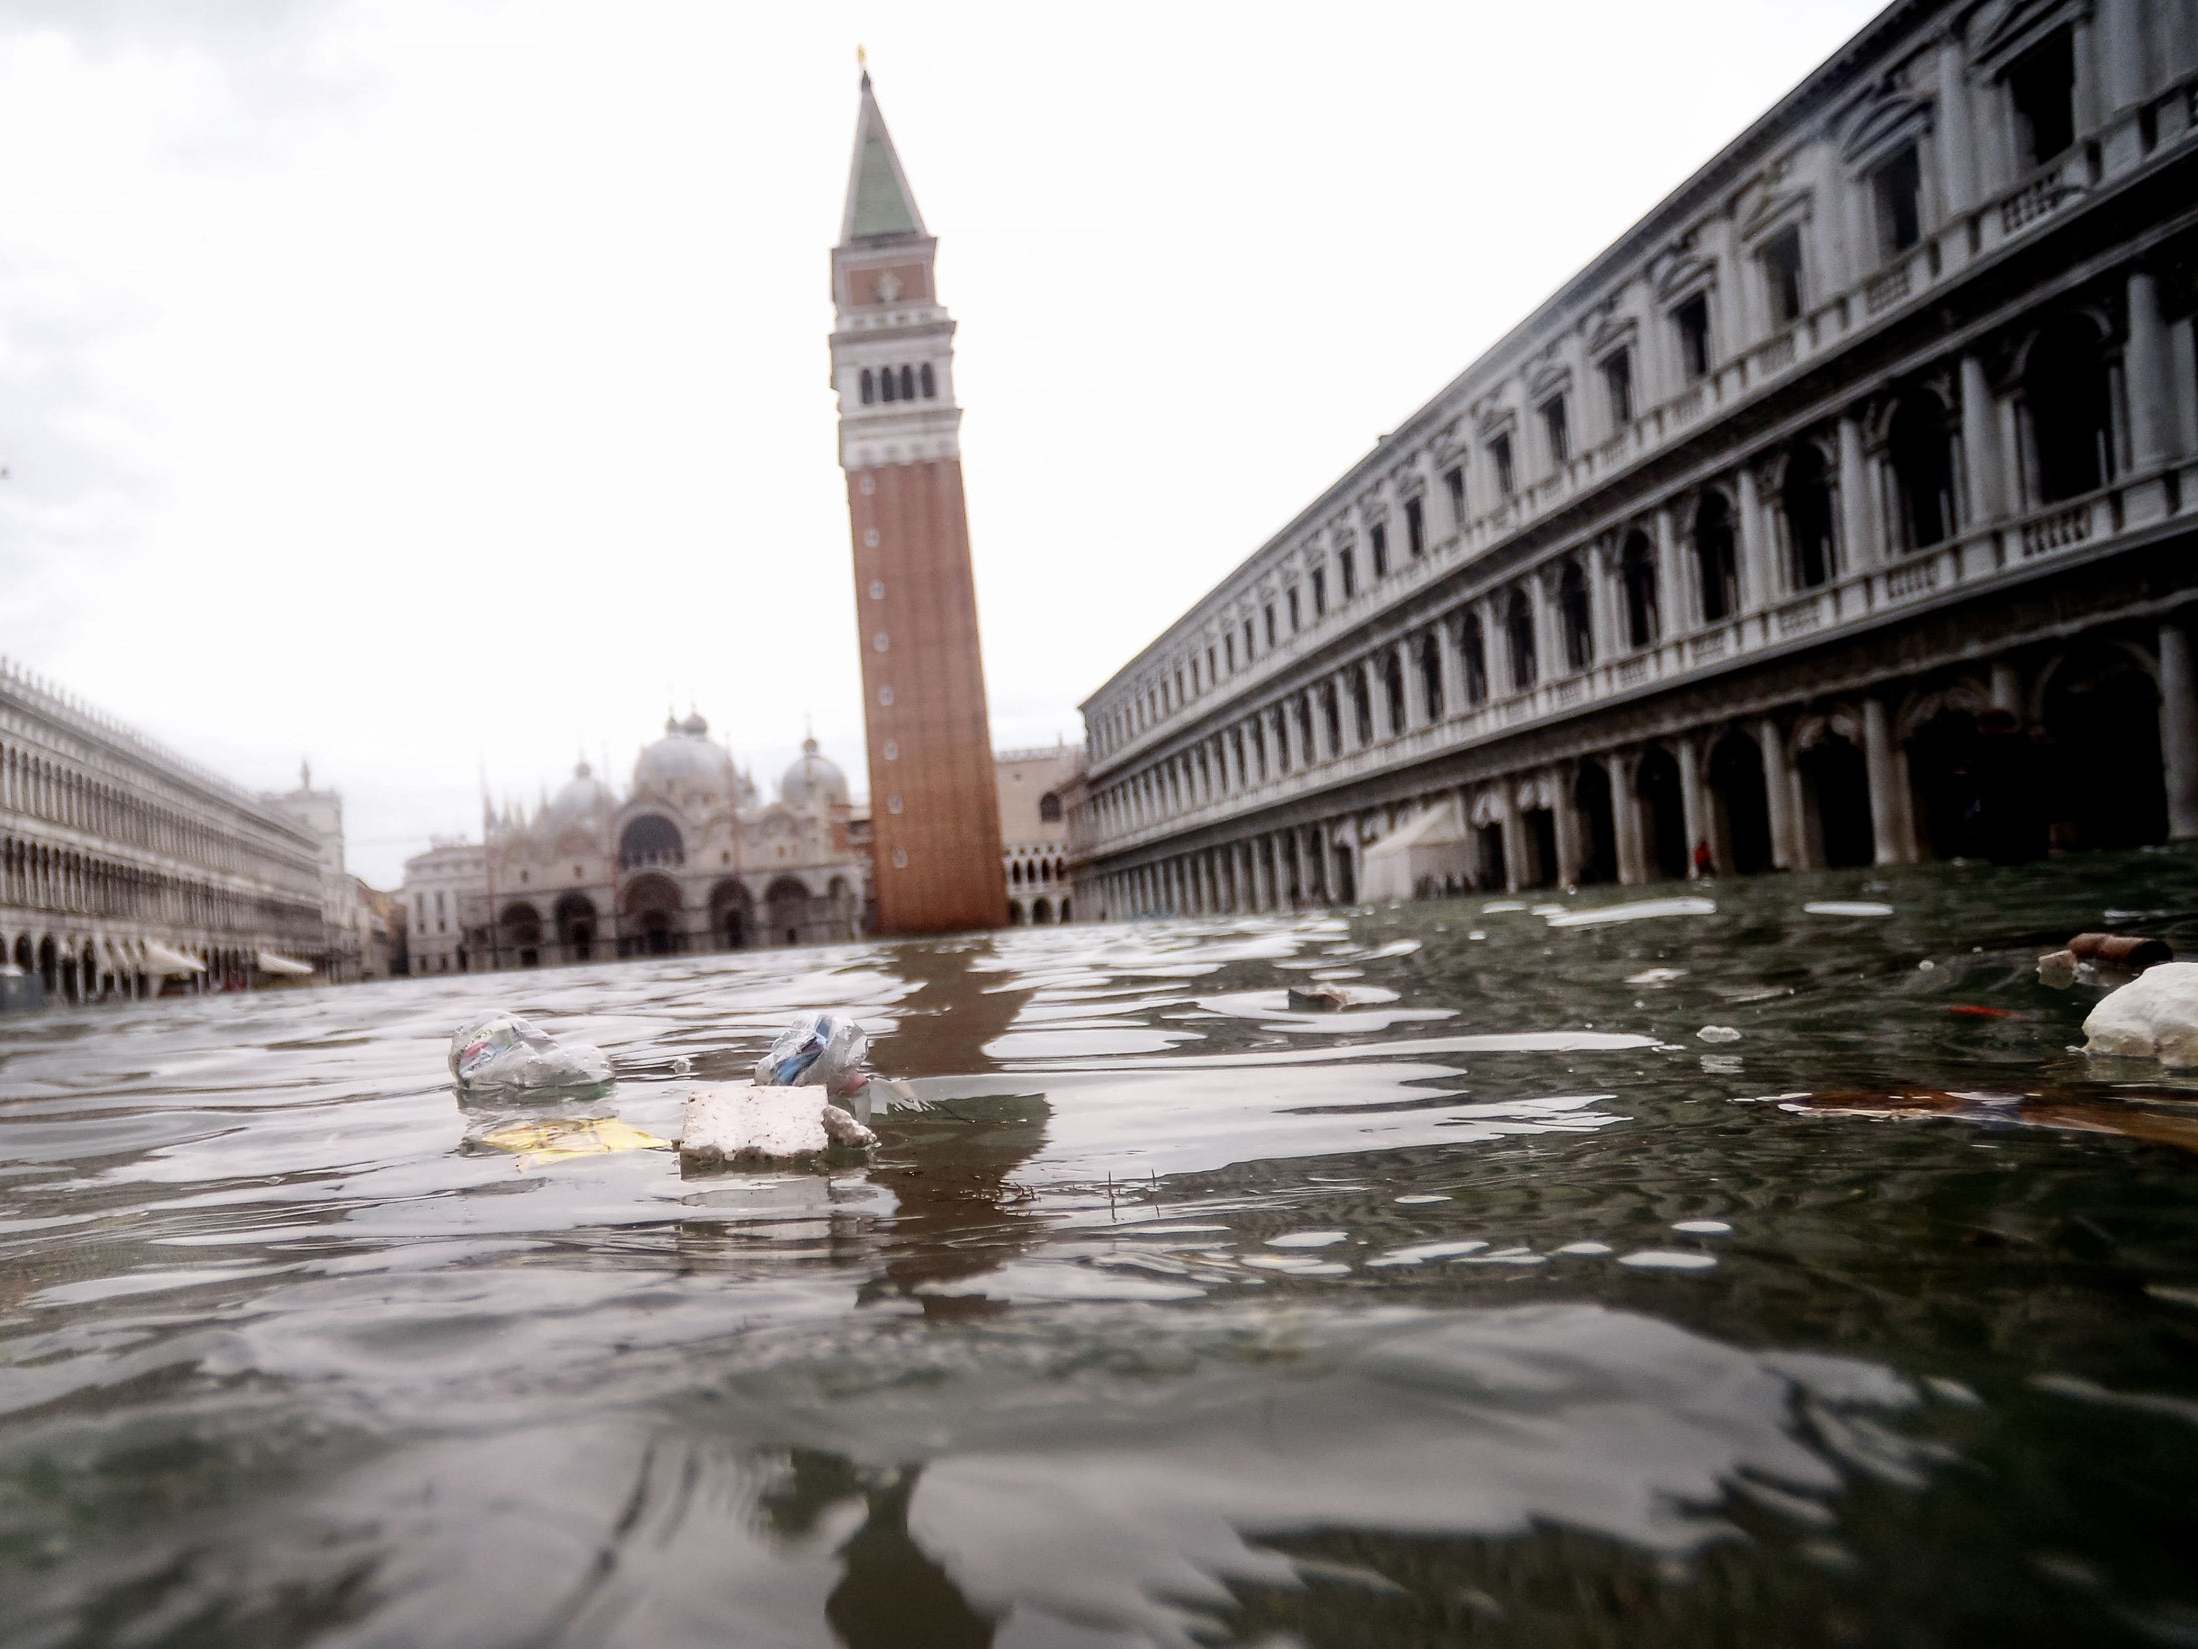 Venice council is flooded minutes after rejecting climate change measures - The Independent